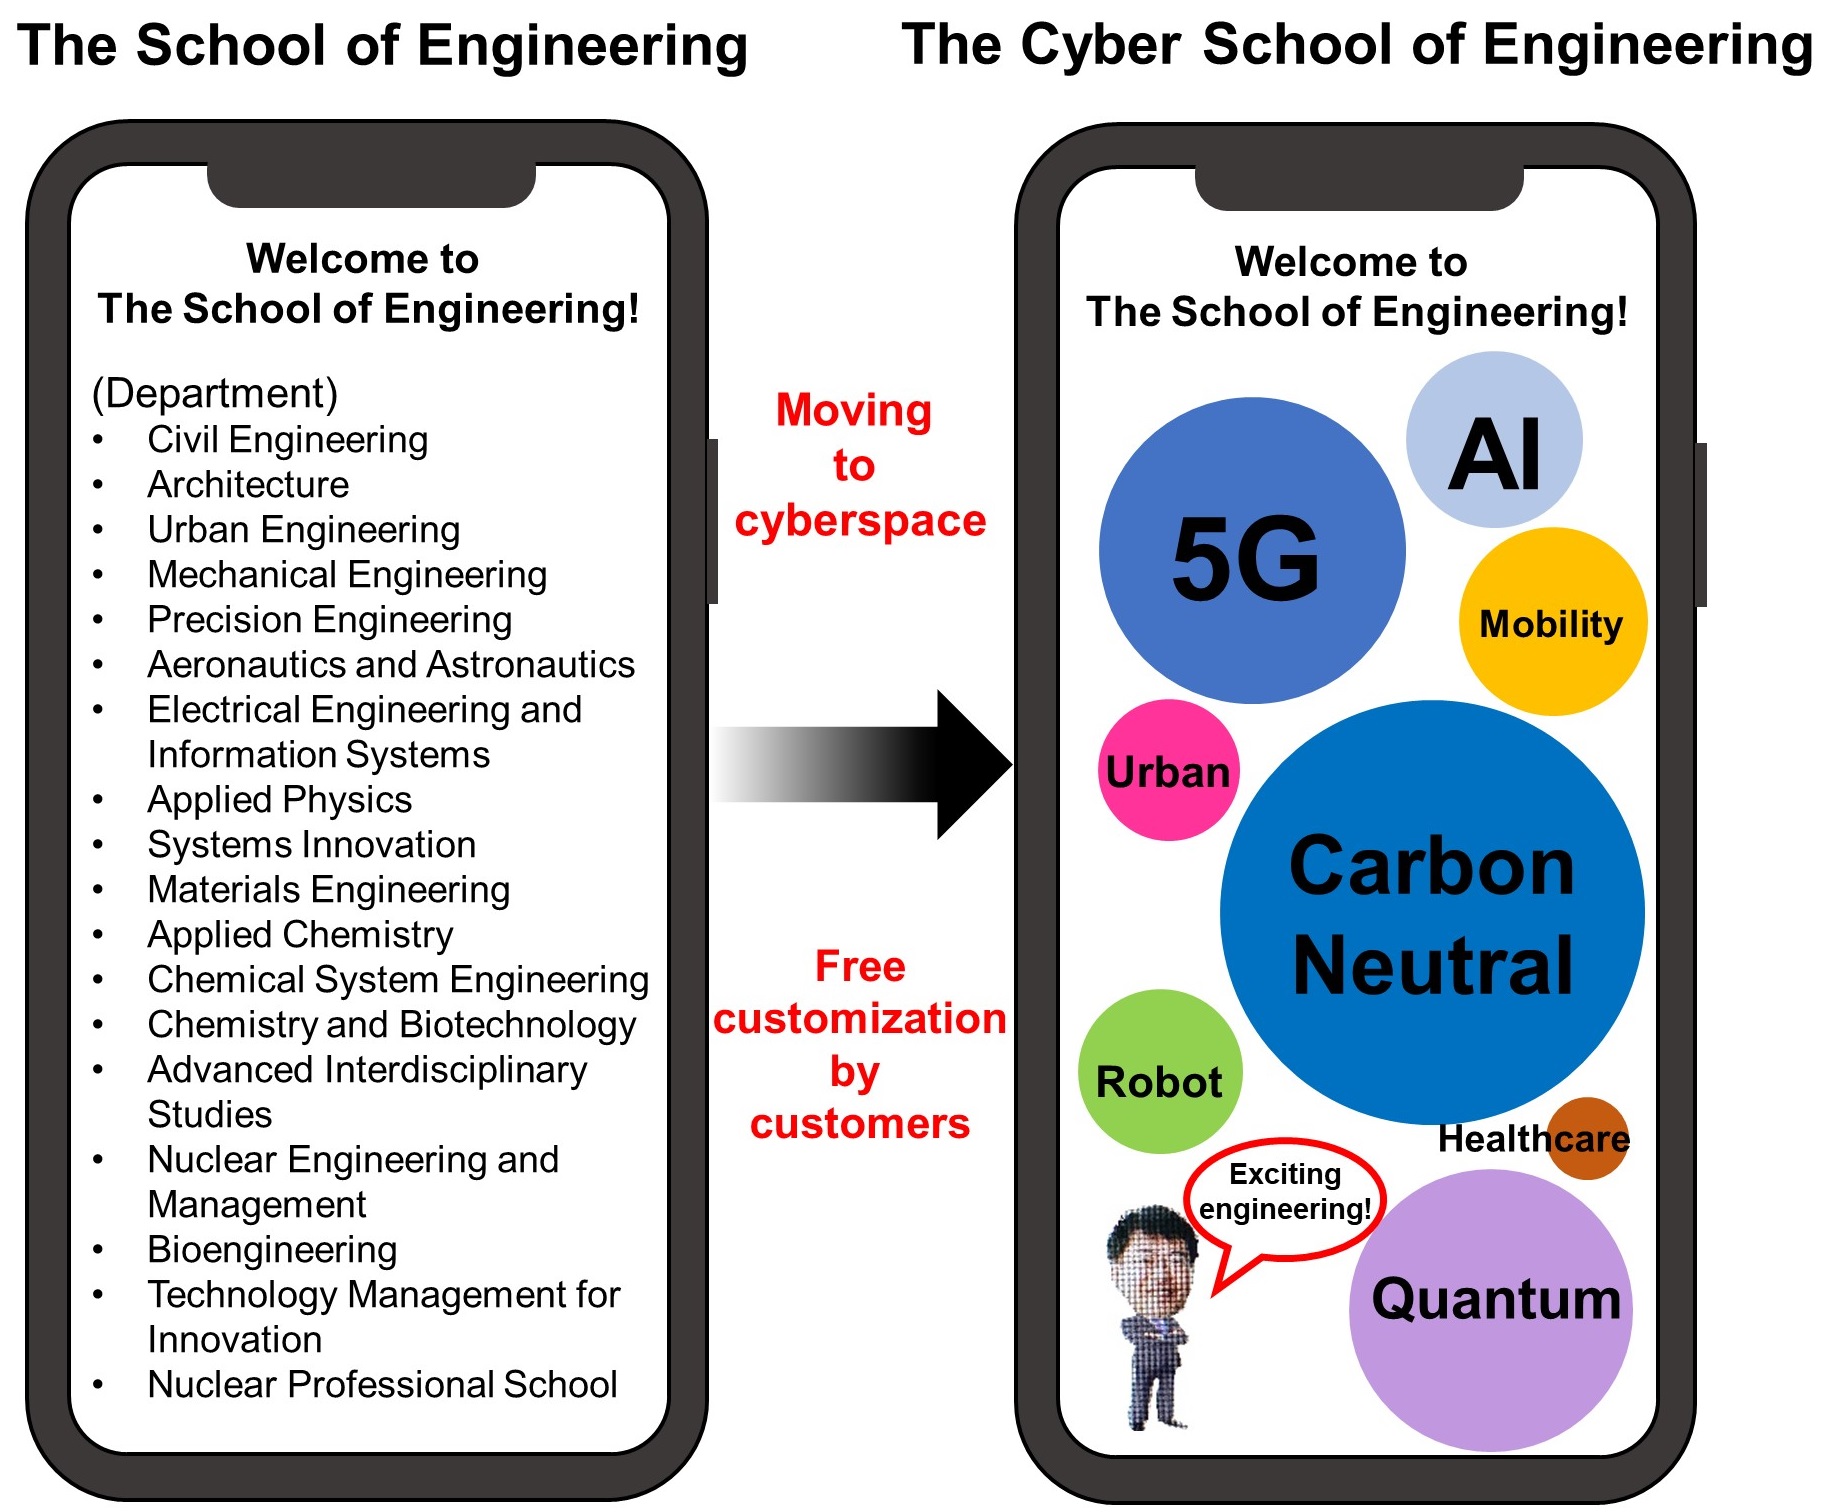 The Cyber School of Engineering reconstructs, in a virtual space, the latest information on the real activities of education and research in the School of Engineering, and provides the information requested by users without stress.